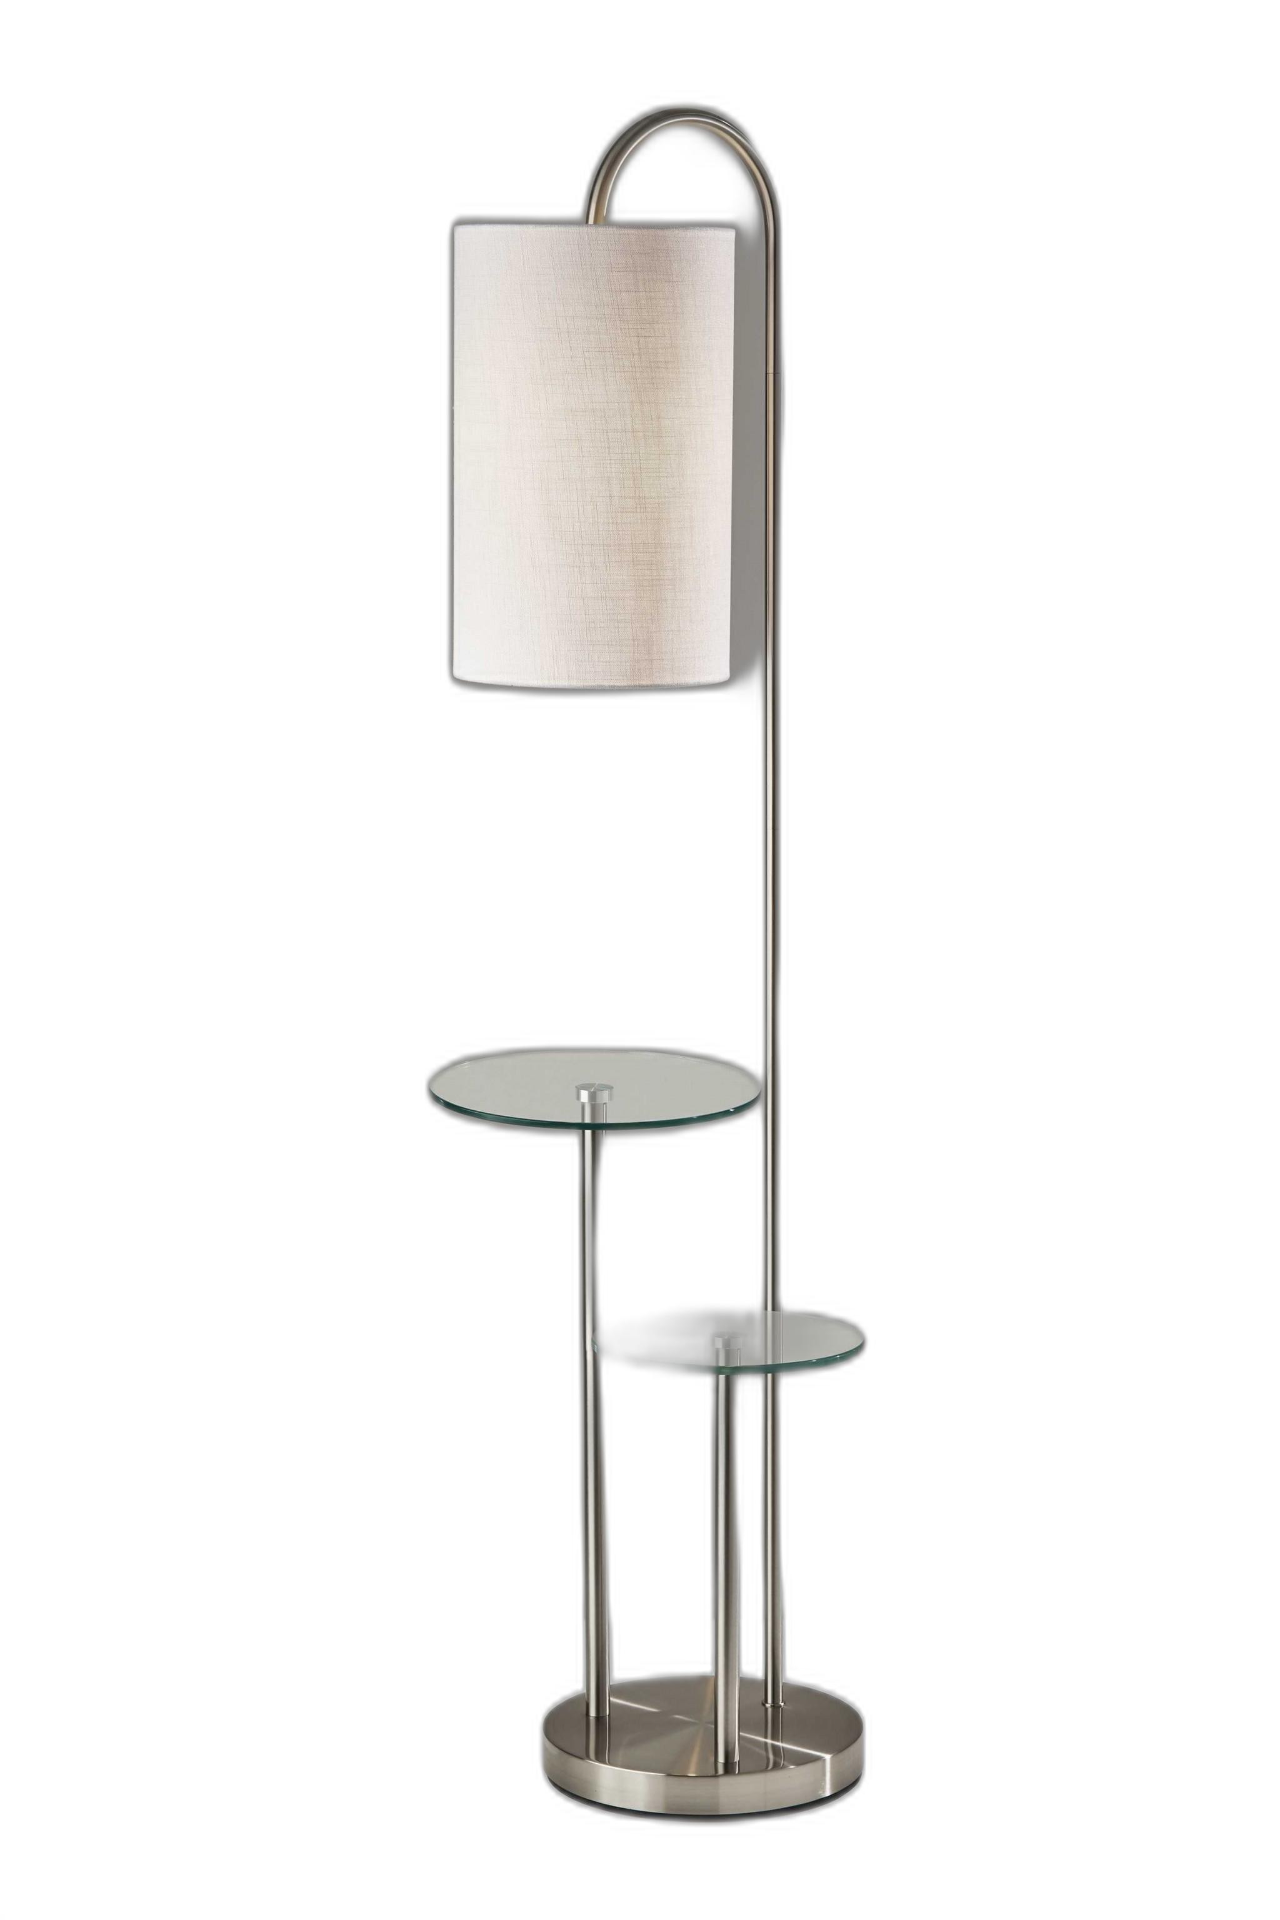 Contemporary Design Floor Lamp With Tray Table (66"H)